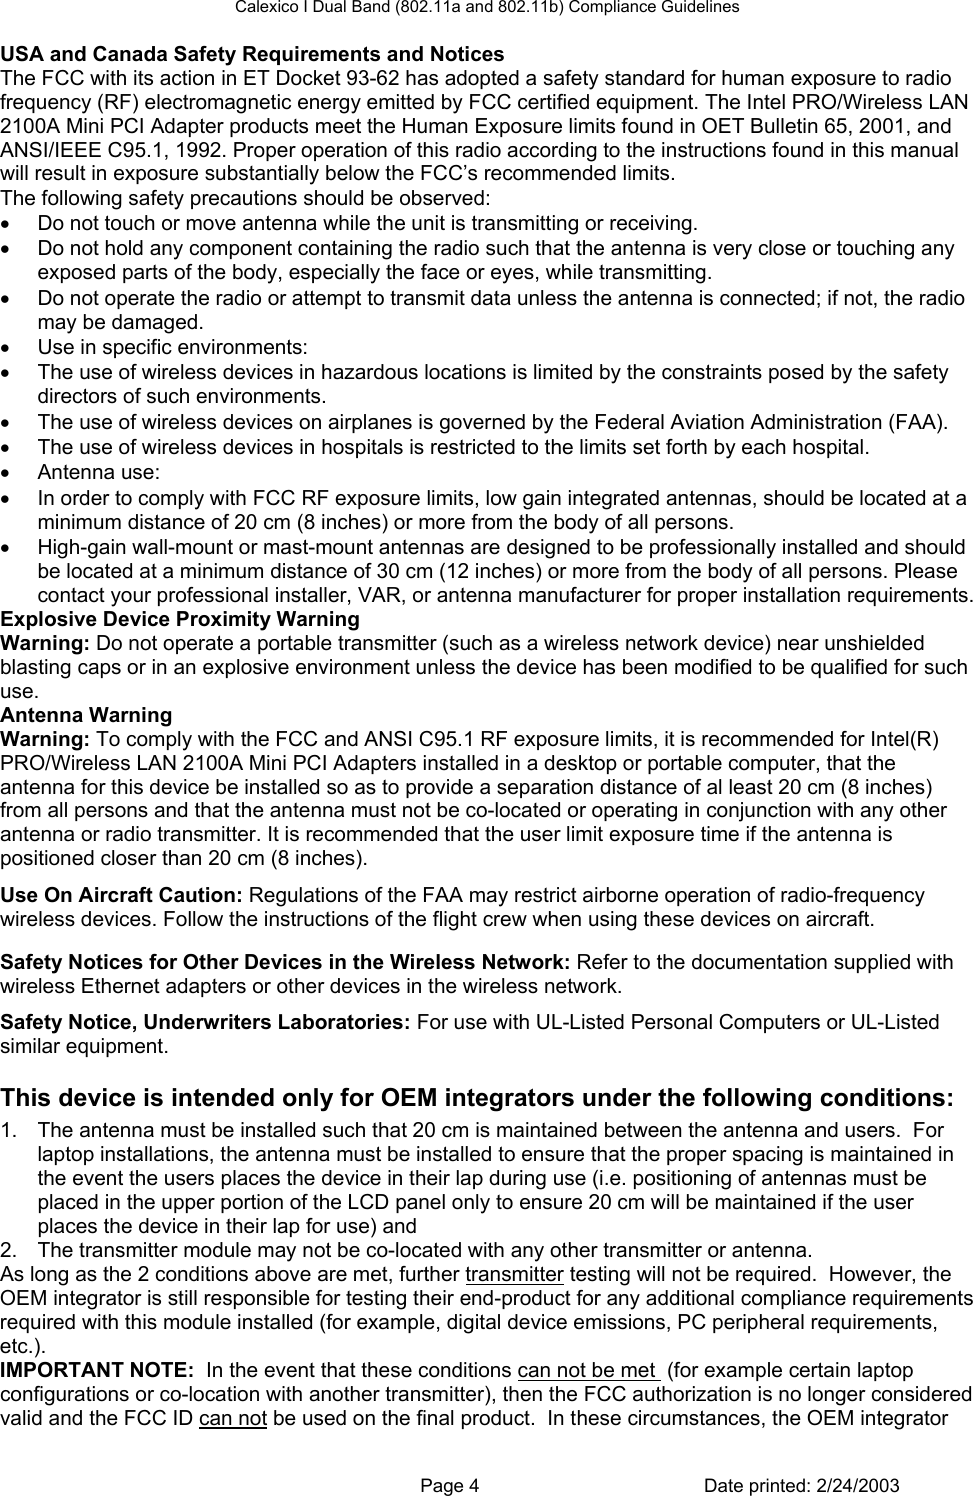 Calexico I Dual Band (802.11a and 802.11b) Compliance Guidelines USA and Canada Safety Requirements and Notices The FCC with its action in ET Docket 93-62 has adopted a safety standard for human exposure to radio frequency (RF) electromagnetic energy emitted by FCC certified equipment. The Intel PRO/Wireless LAN 2100A Mini PCI Adapter products meet the Human Exposure limits found in OET Bulletin 65, 2001, and ANSI/IEEE C95.1, 1992. Proper operation of this radio according to the instructions found in this manual will result in exposure substantially below the FCC’s recommended limits. The following safety precautions should be observed: •  Do not touch or move antenna while the unit is transmitting or receiving.  •  Do not hold any component containing the radio such that the antenna is very close or touching any exposed parts of the body, especially the face or eyes, while transmitting.  •  Do not operate the radio or attempt to transmit data unless the antenna is connected; if not, the radio may be damaged.  •  Use in specific environments:  •  The use of wireless devices in hazardous locations is limited by the constraints posed by the safety directors of such environments.  •  The use of wireless devices on airplanes is governed by the Federal Aviation Administration (FAA).  •  The use of wireless devices in hospitals is restricted to the limits set forth by each hospital.  •  Antenna use:  •  In order to comply with FCC RF exposure limits, low gain integrated antennas, should be located at a minimum distance of 20 cm (8 inches) or more from the body of all persons.  •  High-gain wall-mount or mast-mount antennas are designed to be professionally installed and should be located at a minimum distance of 30 cm (12 inches) or more from the body of all persons. Please contact your professional installer, VAR, or antenna manufacturer for proper installation requirements.  Explosive Device Proximity Warning Warning: Do not operate a portable transmitter (such as a wireless network device) near unshielded blasting caps or in an explosive environment unless the device has been modified to be qualified for such use. Antenna Warning Warning: To comply with the FCC and ANSI C95.1 RF exposure limits, it is recommended for Intel(R) PRO/Wireless LAN 2100A Mini PCI Adapters installed in a desktop or portable computer, that the antenna for this device be installed so as to provide a separation distance of al least 20 cm (8 inches) from all persons and that the antenna must not be co-located or operating in conjunction with any other antenna or radio transmitter. It is recommended that the user limit exposure time if the antenna is positioned closer than 20 cm (8 inches). Use On Aircraft Caution: Regulations of the FAA may restrict airborne operation of radio-frequency wireless devices. Follow the instructions of the flight crew when using these devices on aircraft. Other Wireless Devices Safety Notices for Other Devices in the Wireless Network: Refer to the documentation supplied with wireless Ethernet adapters or other devices in the wireless network. Safety Notice, Underwriters Laboratories: For use with UL-Listed Personal Computers or UL-Listed similar equipment. This device is intended only for OEM integrators under the following conditions: 1.  The antenna must be installed such that 20 cm is maintained between the antenna and users.  For laptop installations, the antenna must be installed to ensure that the proper spacing is maintained in the event the users places the device in their lap during use (i.e. positioning of antennas must be placed in the upper portion of the LCD panel only to ensure 20 cm will be maintained if the user places the device in their lap for use) and 2.  The transmitter module may not be co-located with any other transmitter or antenna.  As long as the 2 conditions above are met, further transmitter testing will not be required.  However, the OEM integrator is still responsible for testing their end-product for any additional compliance requirements required with this module installed (for example, digital device emissions, PC peripheral requirements, etc.). IMPORTANT NOTE:  In the event that these conditions can not be met  (for example certain laptop configurations or co-location with another transmitter), then the FCC authorization is no longer considered valid and the FCC ID can not be used on the final product.  In these circumstances, the OEM integrator   Page 4  Date printed: 2/24/2003 